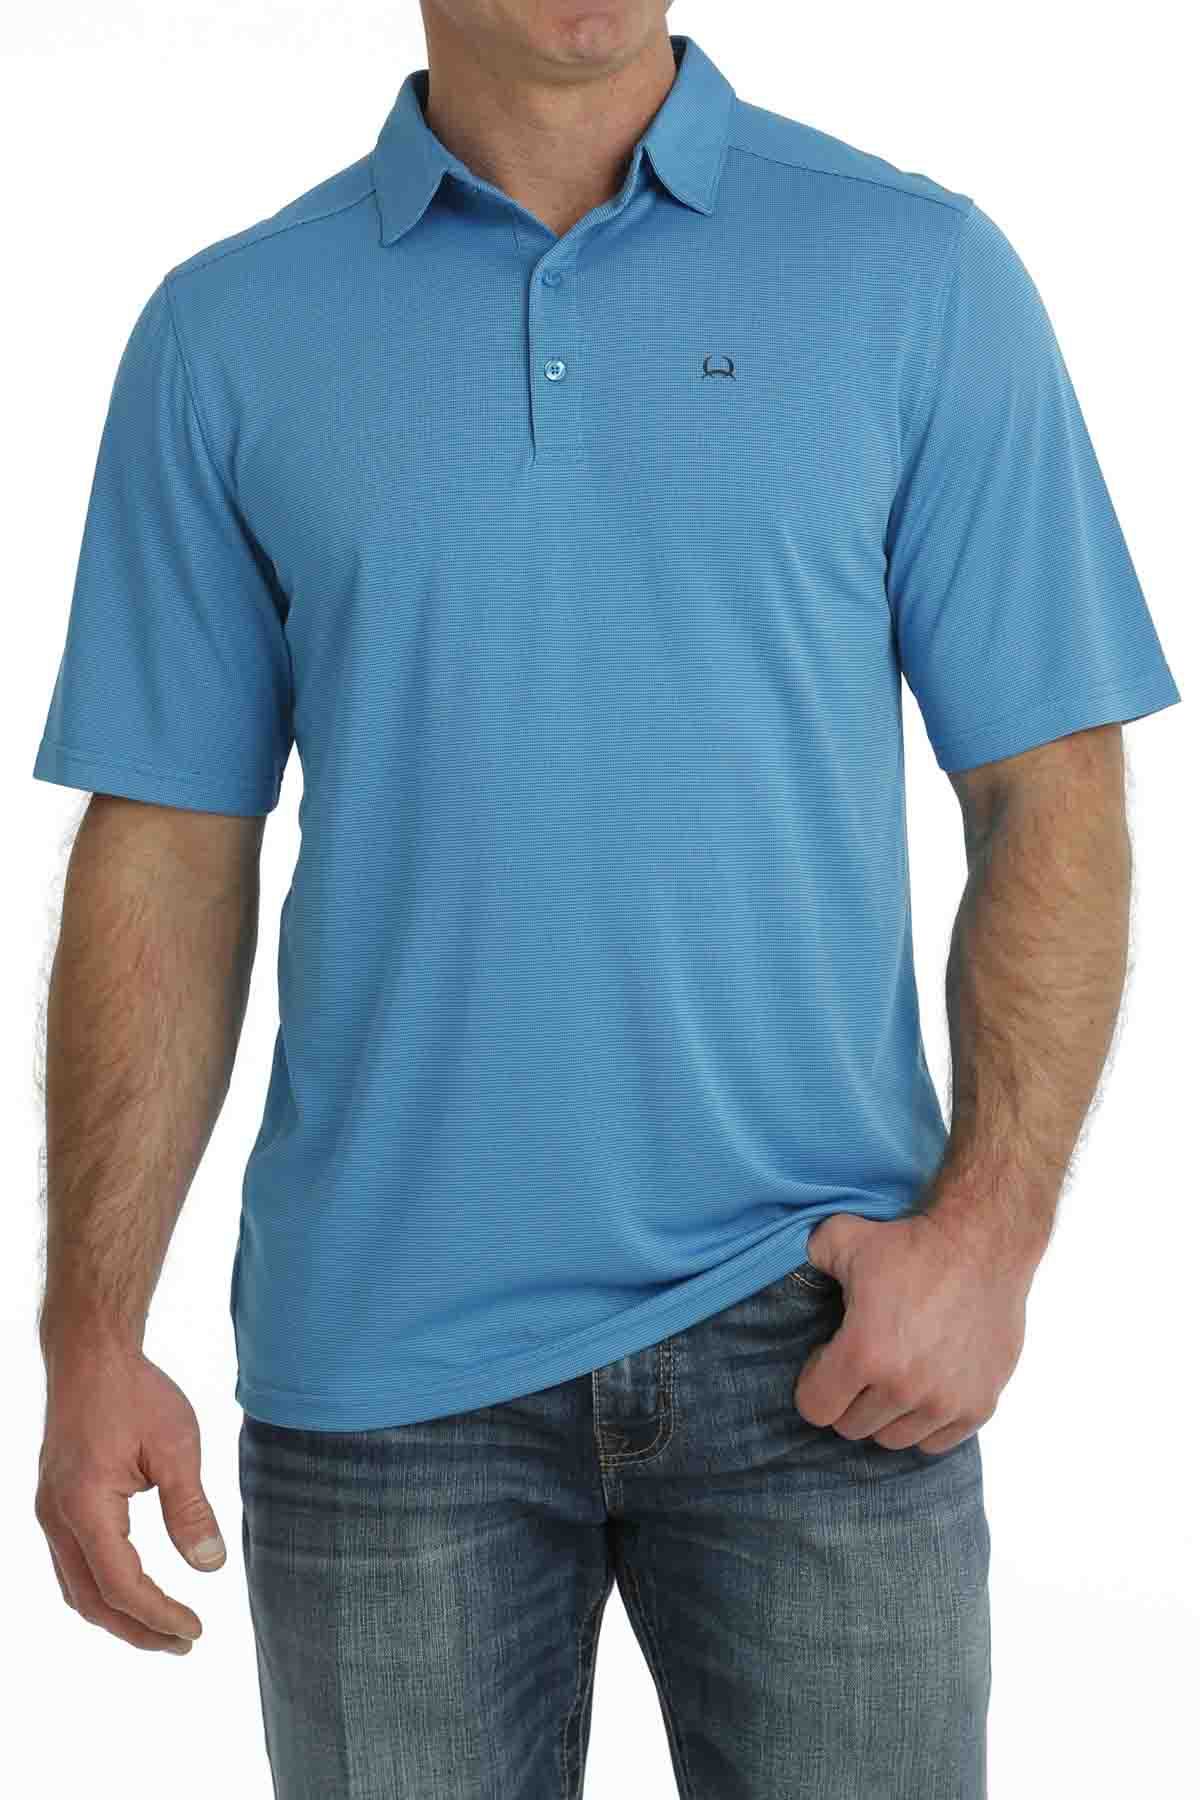 Arenaflex Short Sleeve Polo in Blue by Cinch